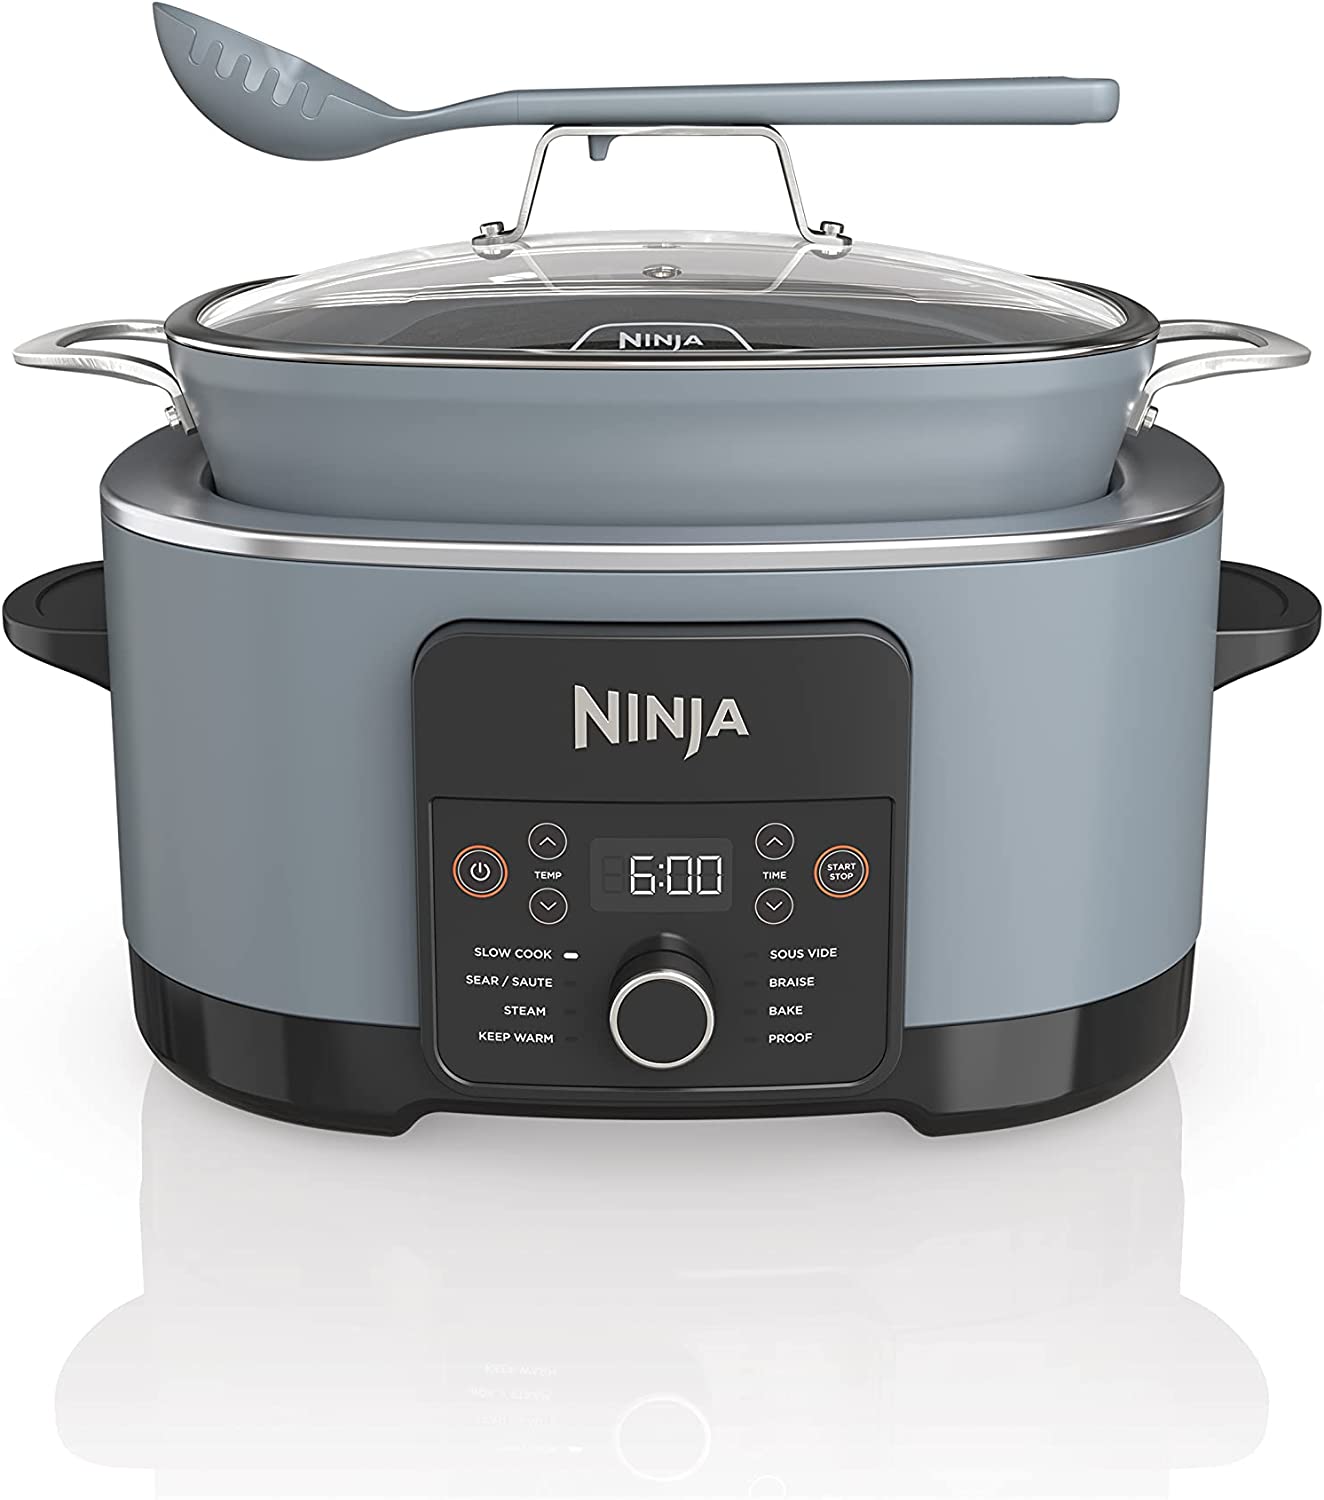 Review of Ninja MC1001 Foodi PossibleCooker PRO 8.5 Quart Multi-Cooker, with 8-in-1 Slow Cooker, Pressure Cooker, Dutch Oven